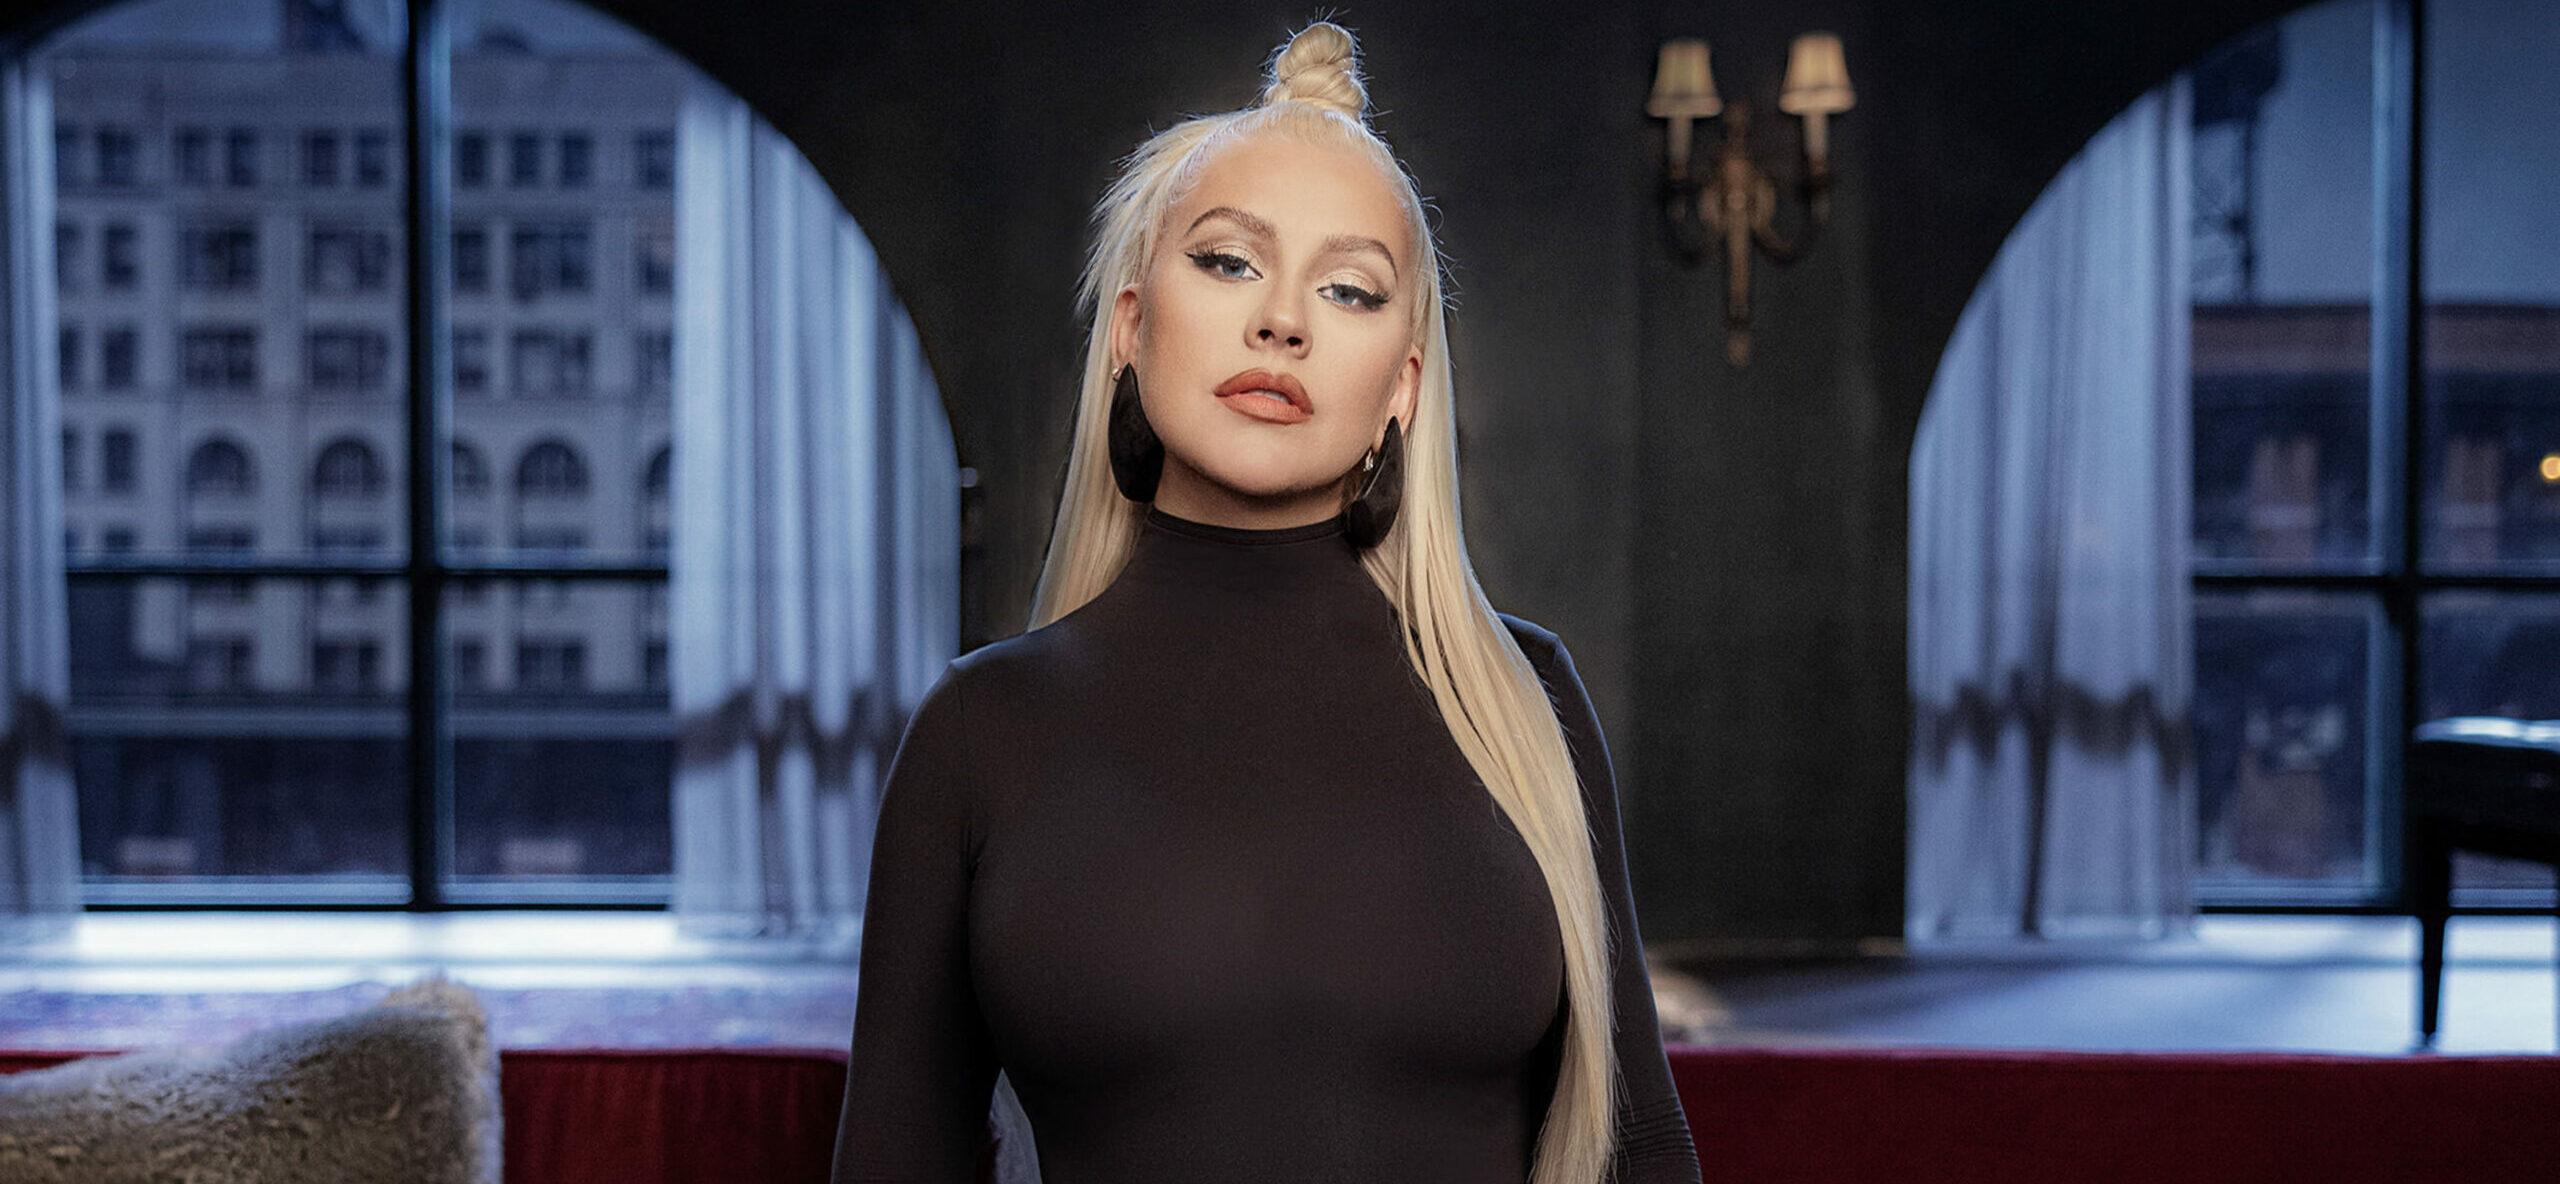 Christina Aguilera sharing expert advice on how to make a song your own as she returns to MasterClass